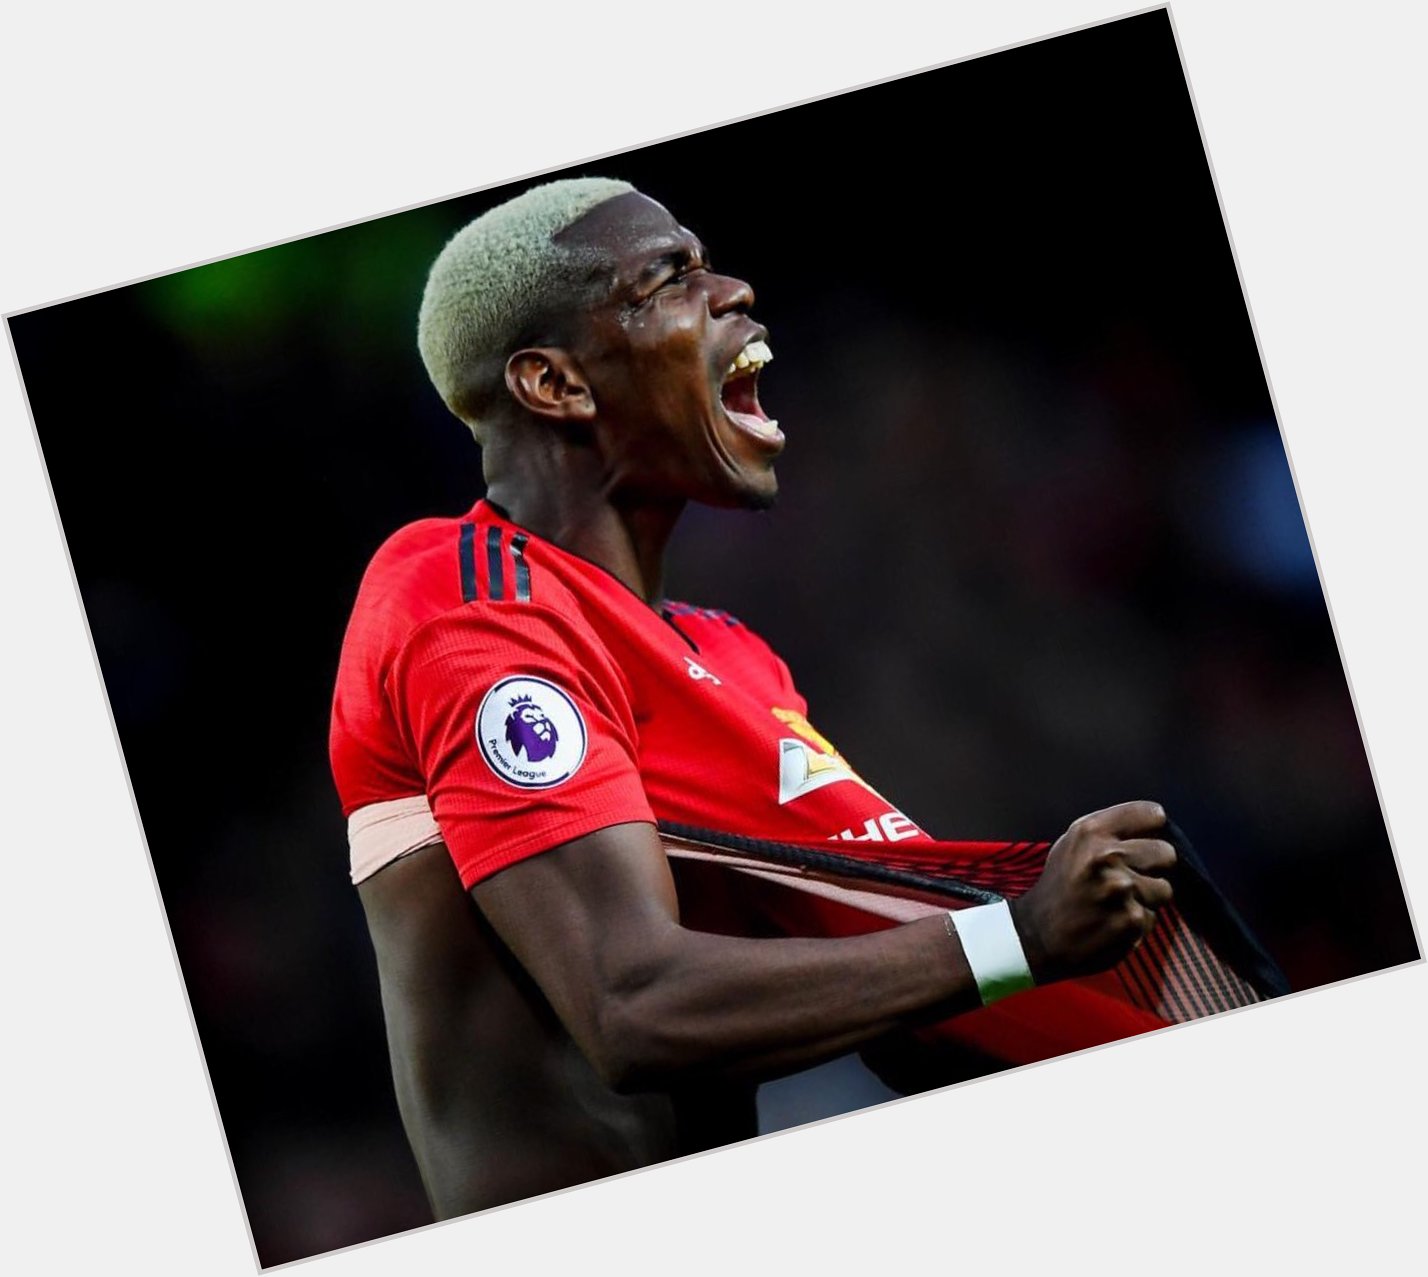 Happy birthday to Paul Pogba who turns 28 today, the best midfielder itw. Keep on shining Labile  